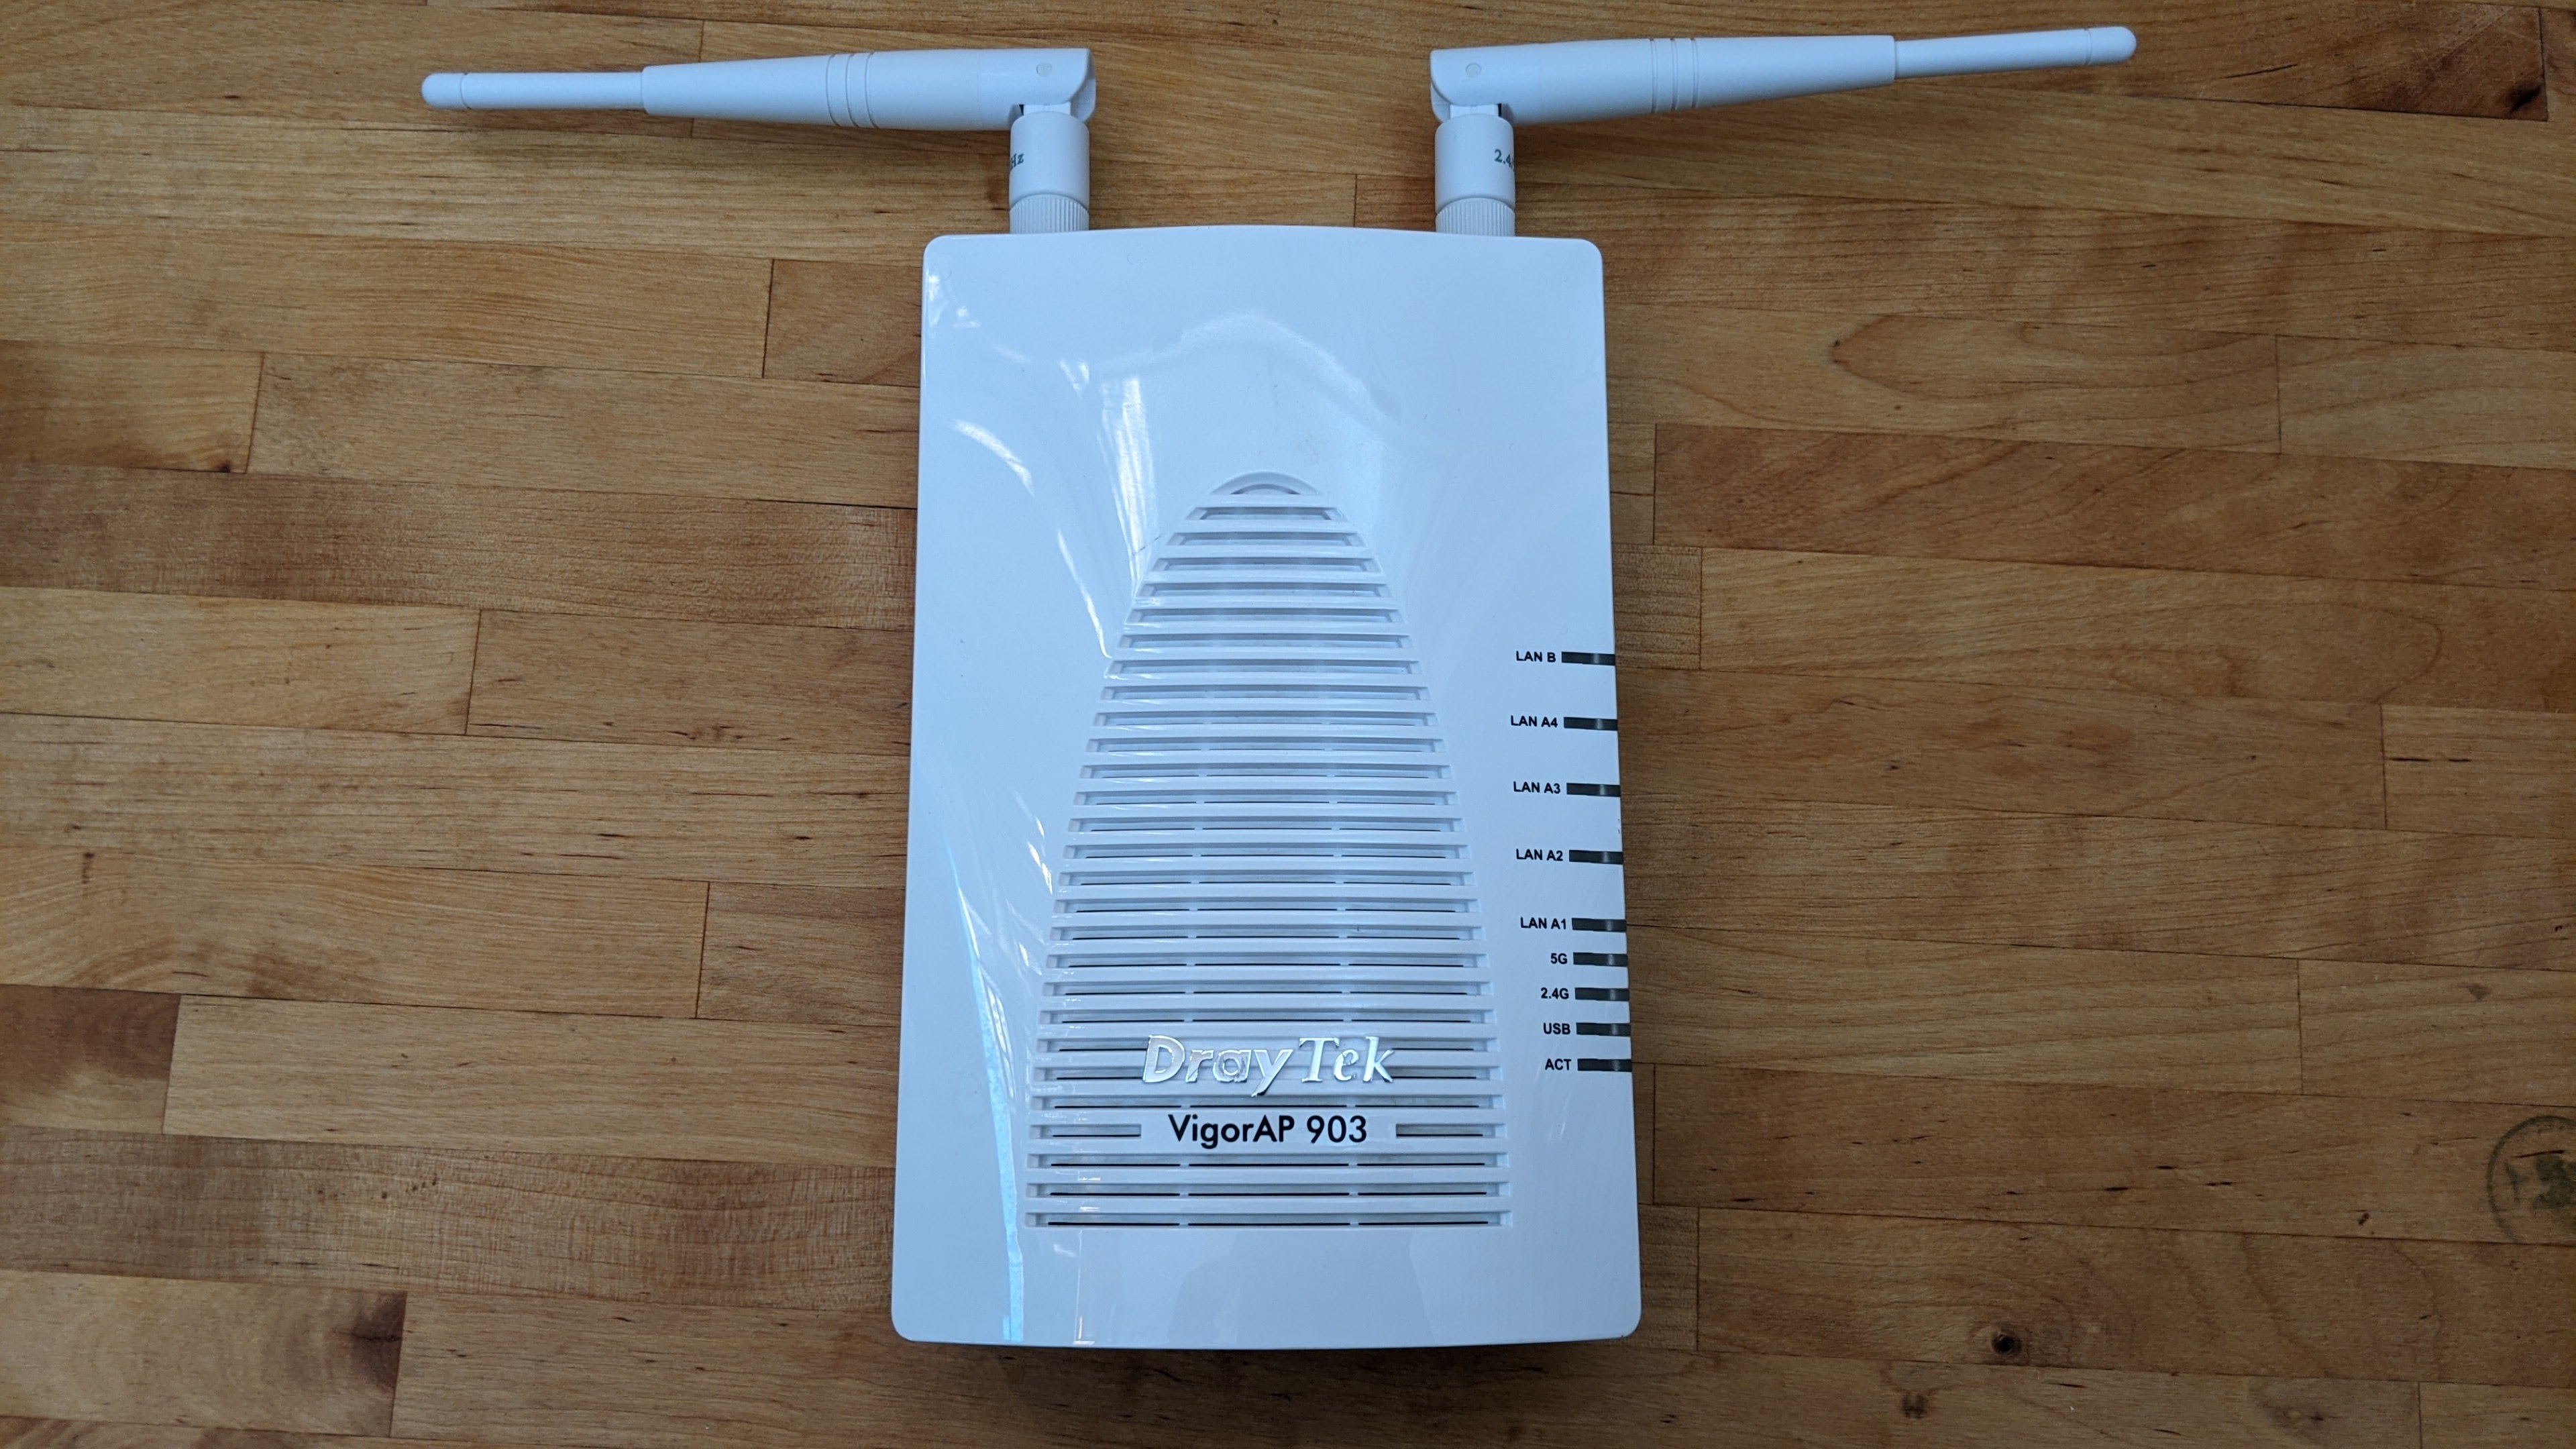 The VigorAP 903 is another great wireless access point that can be part of a mesh network, with Ethernet router built in, and large external antennas.